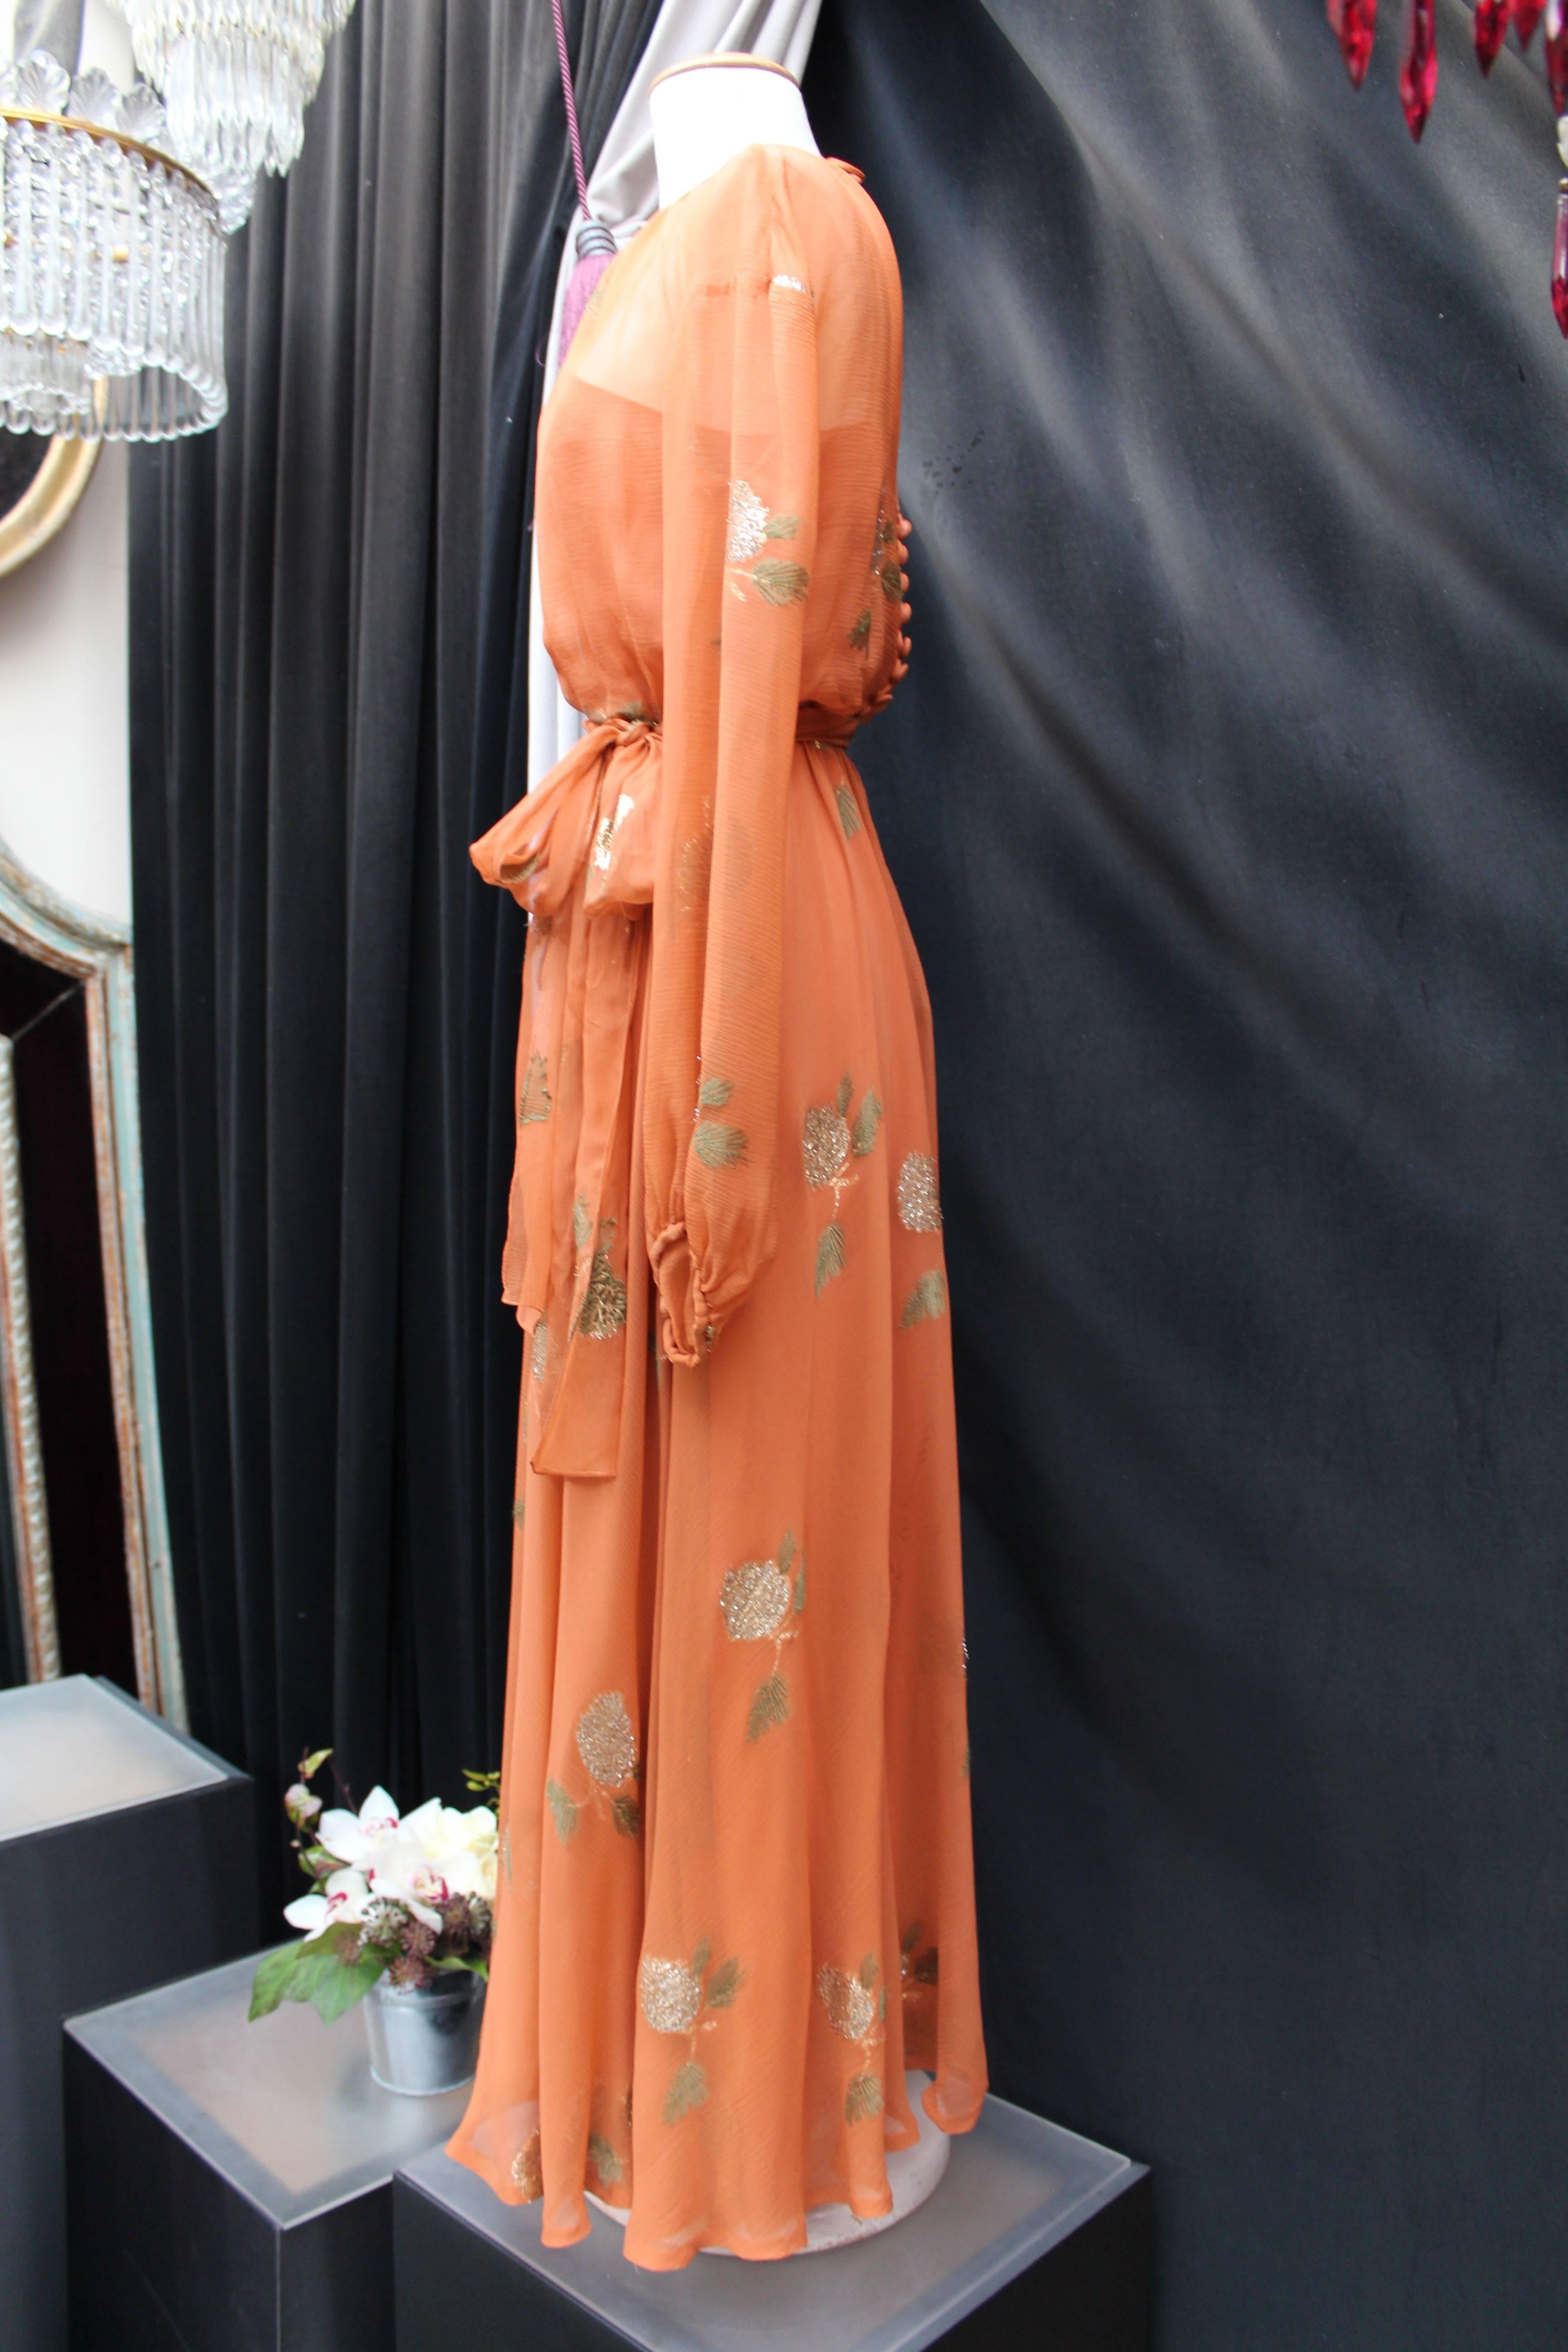 JEAN PATOU HAUTE COUTURE (Made in France) Long evening dress composed of rusty orange silk chiffon, decorated with green and gold lamé embroideries representing leaves. The long sheer chiffon sleeves are tightened at wrists. Back closure with a